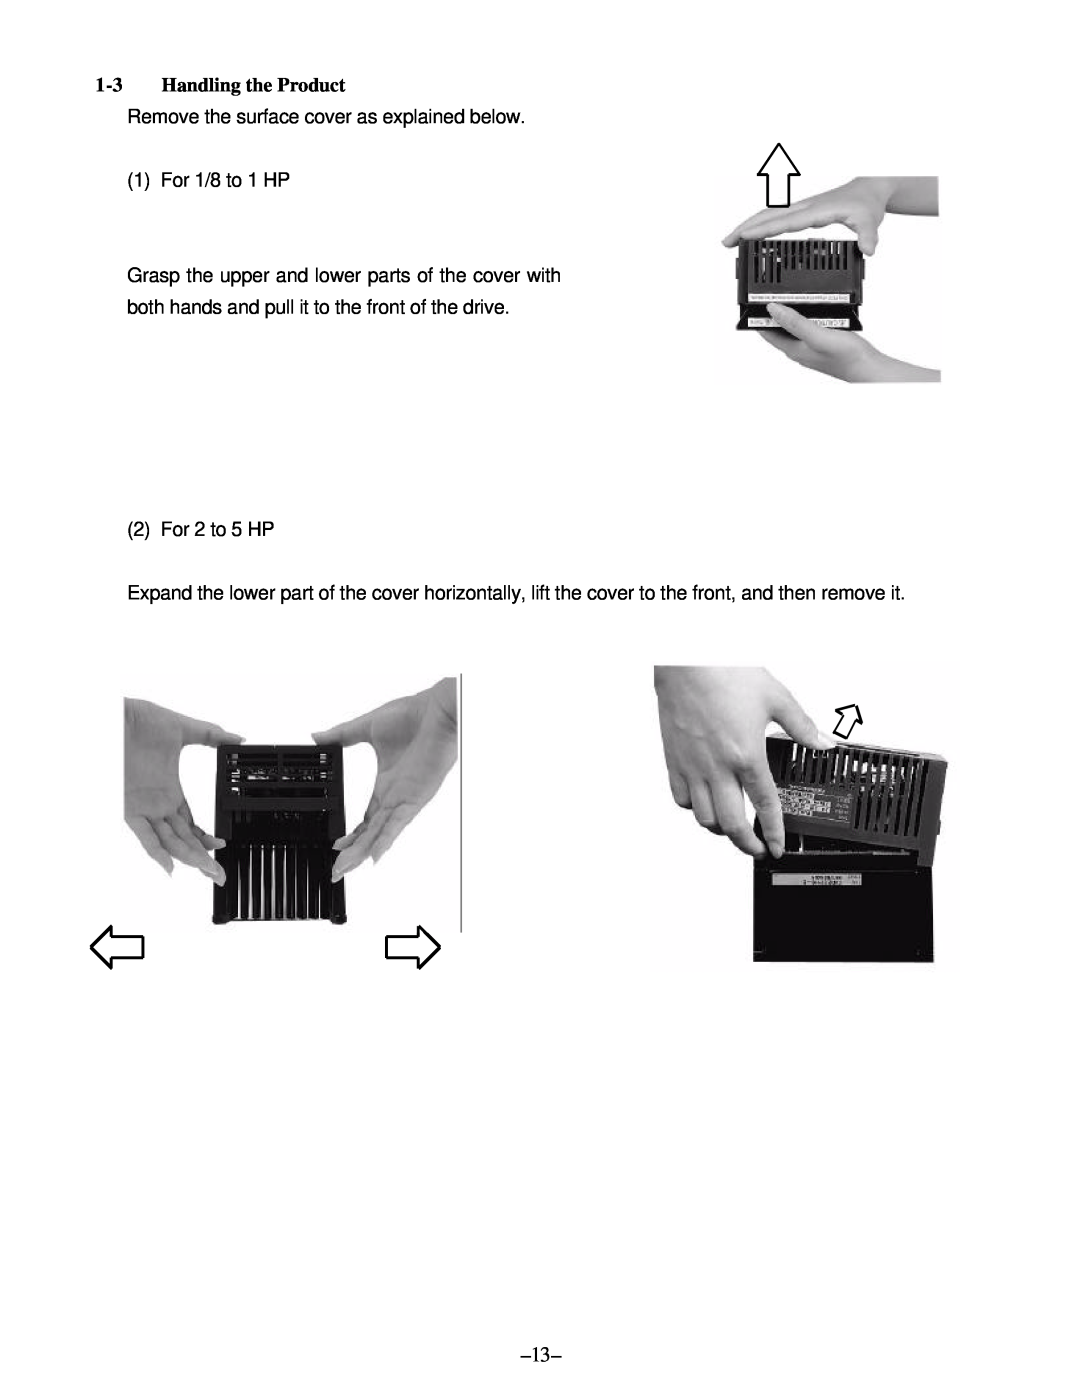 GE C11, AF-300 manual Handling the Product, Remove the surface cover as explained below 1 For 1/8 to 1 HP, For 2 to 5 HP 